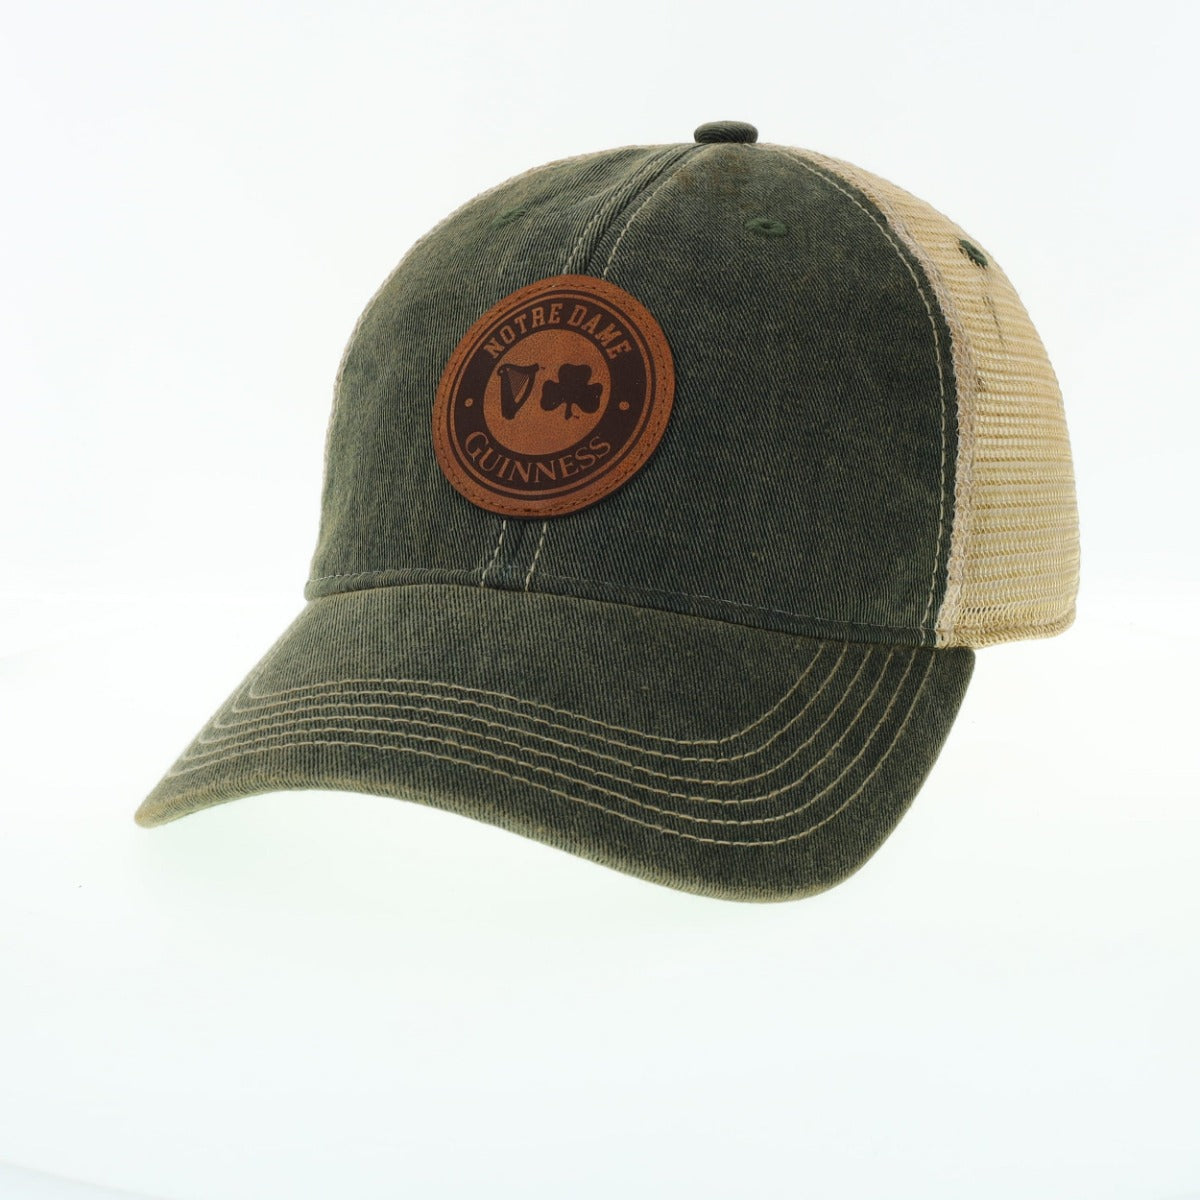 Notre Dame Old Favourite Green Trucker Hat